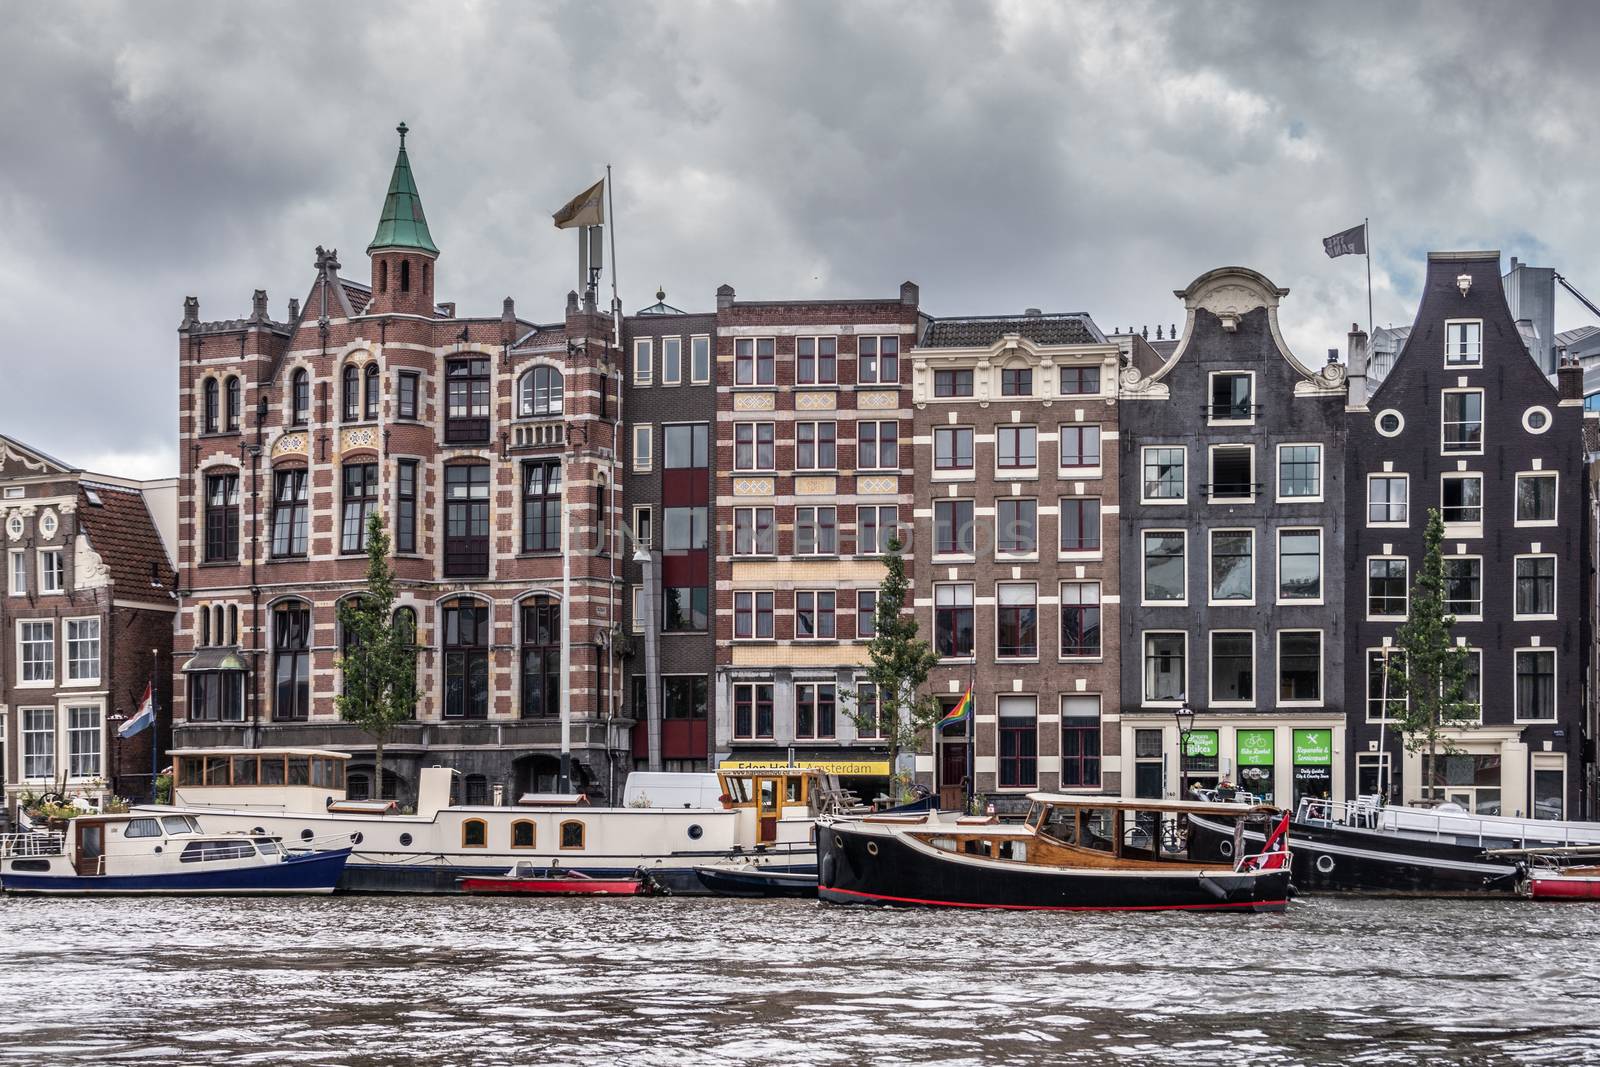 Amsterdam, the Netherlands - July 1, 2019: Line of historic houses with gables along Amstel River downtown. Many houseboats and other vessels on dark river under heavy cloudscape.